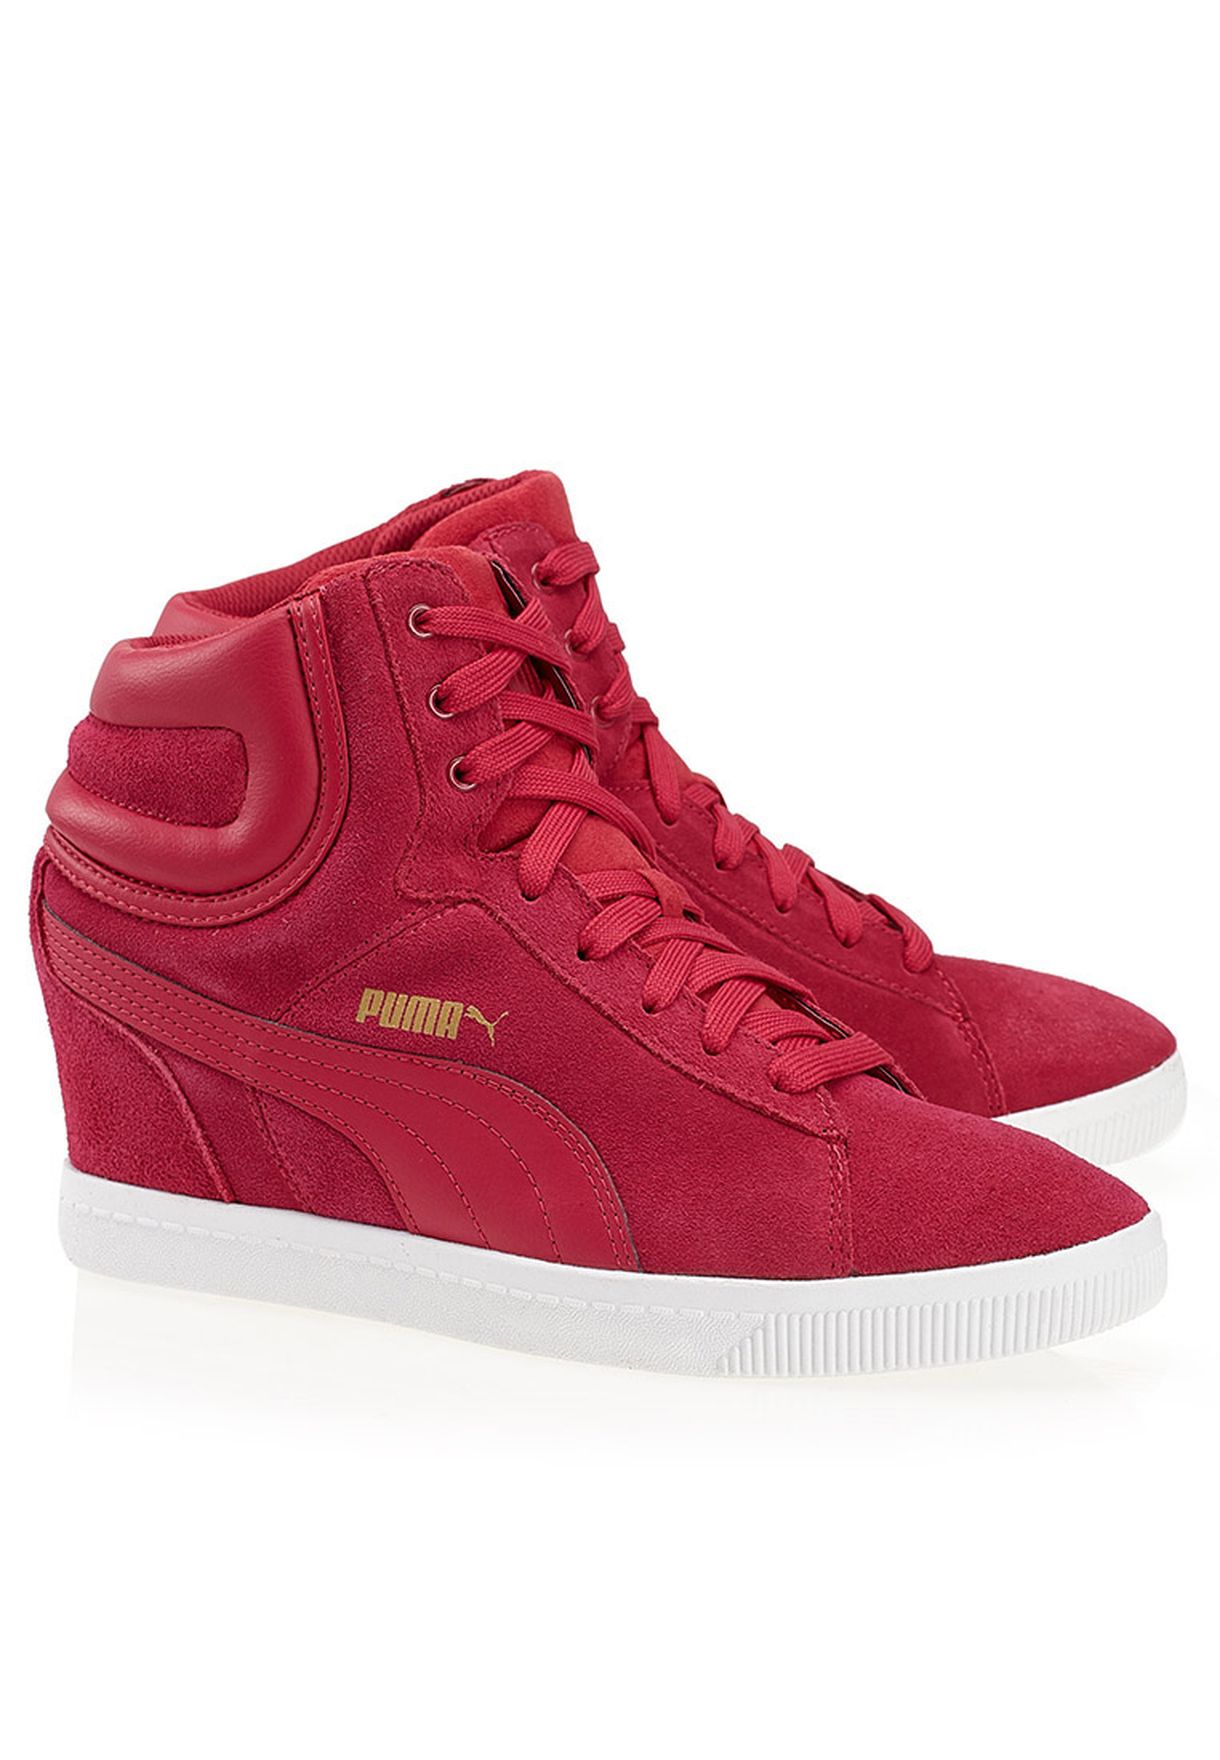 Shop PUMA red Vikky Wedge Sneakers 